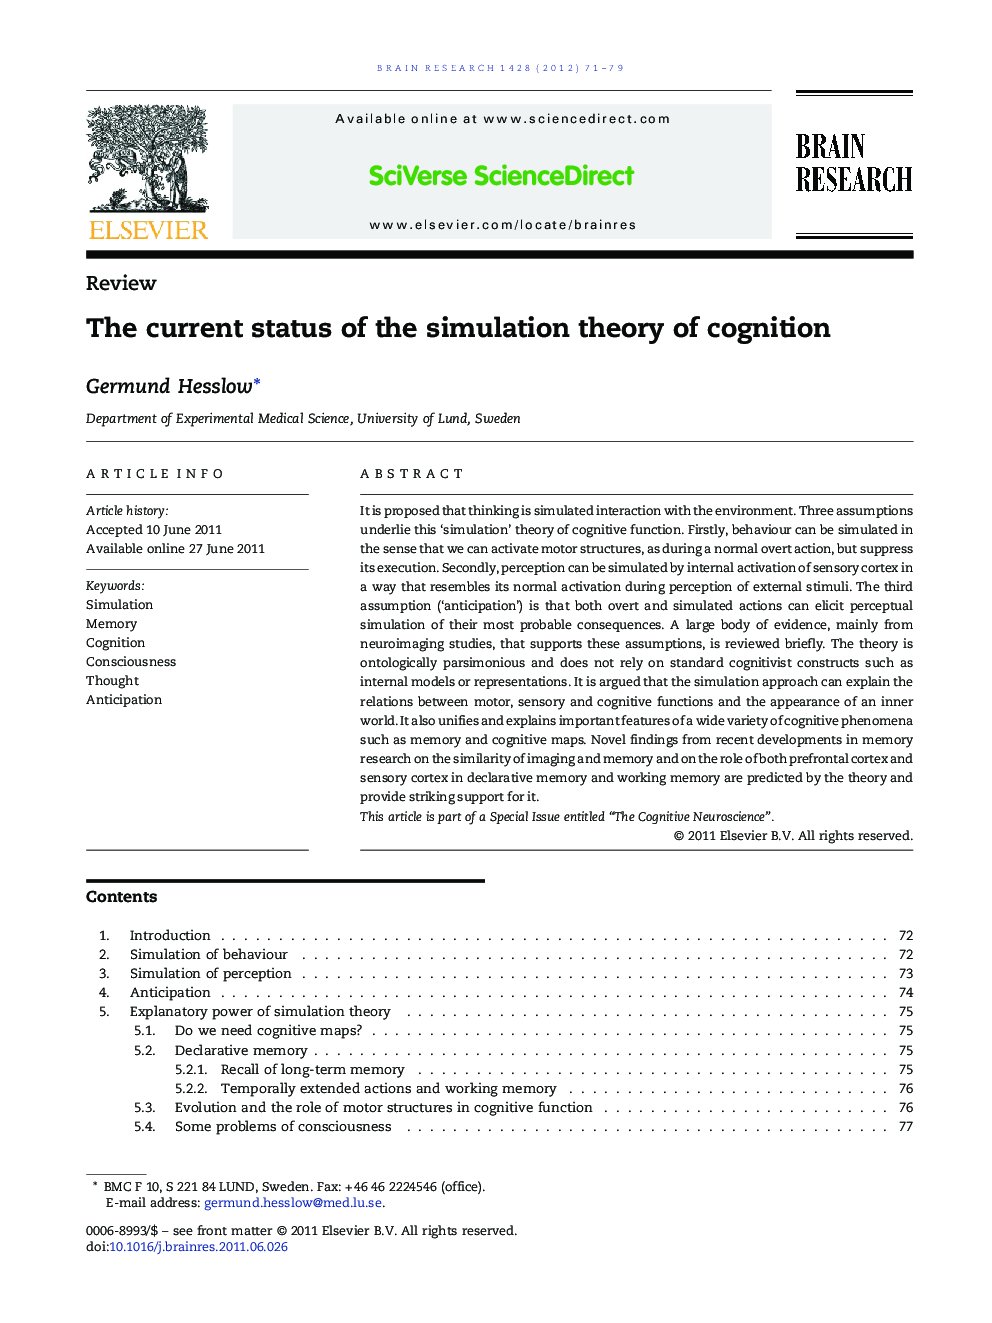 The current status of the simulation theory of cognition